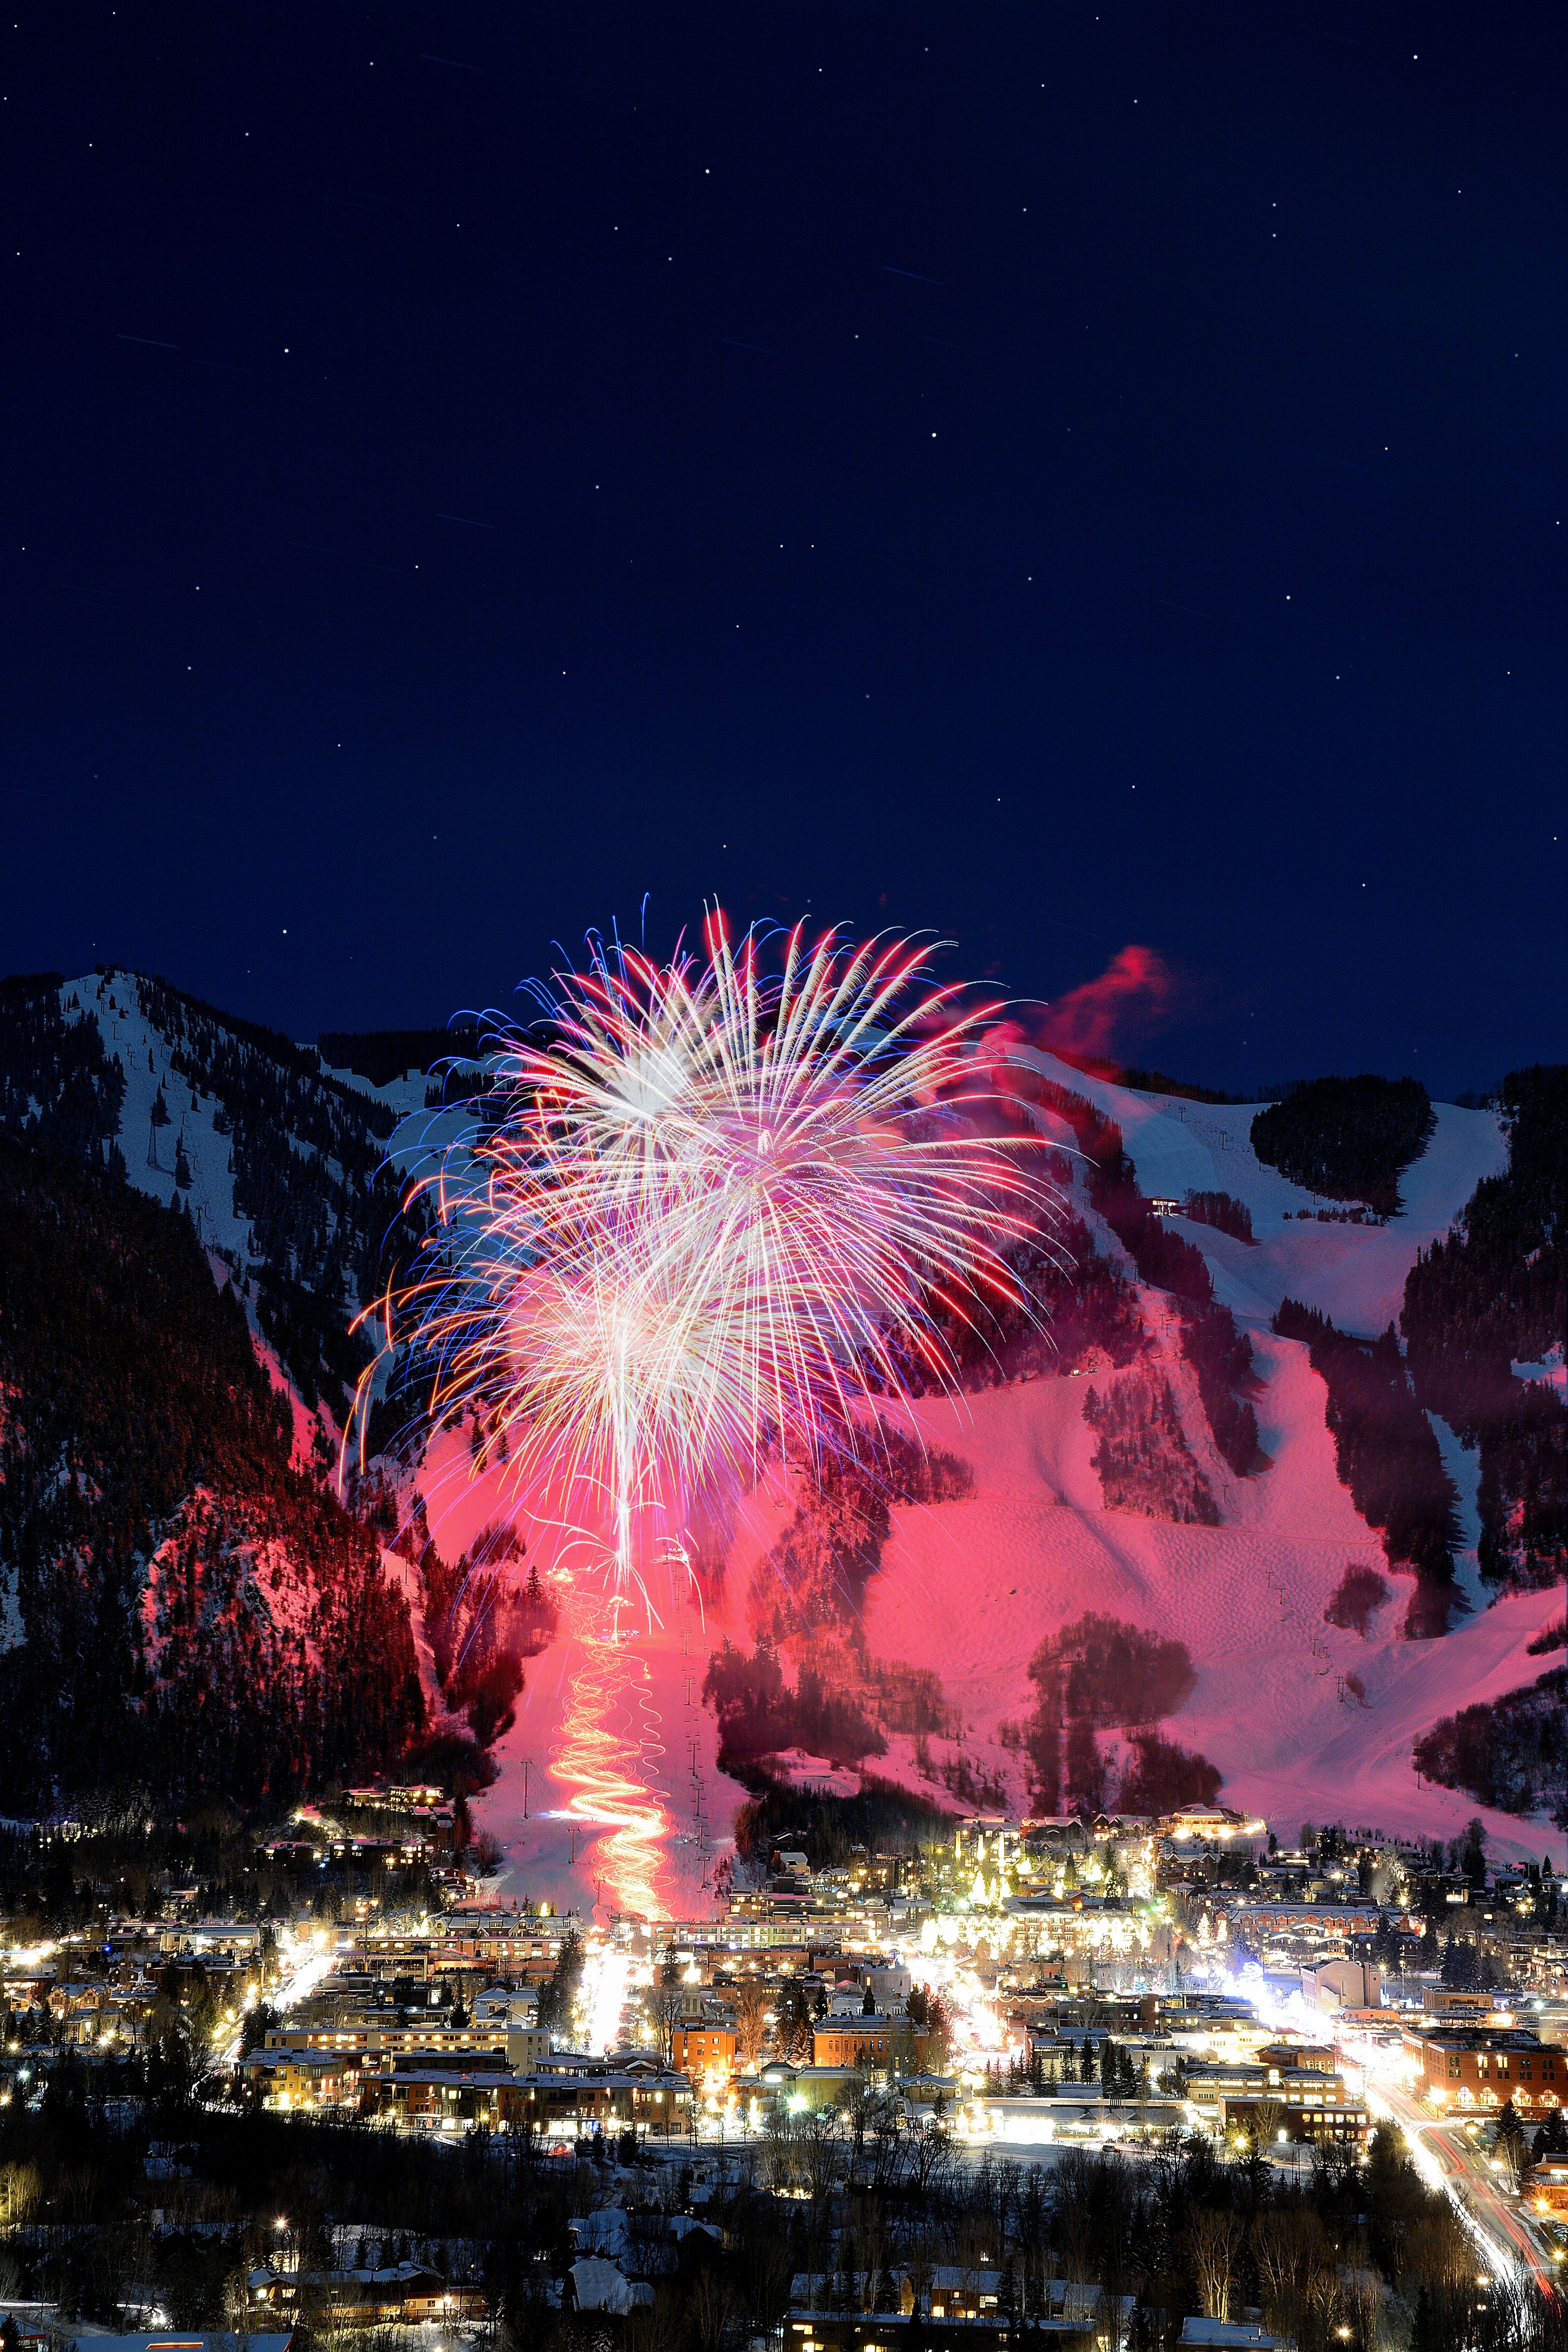 Aspen Mountain Town in Colorado on New Year's Eve with fireworks in winter, Aspen, Colorado, CO, USA